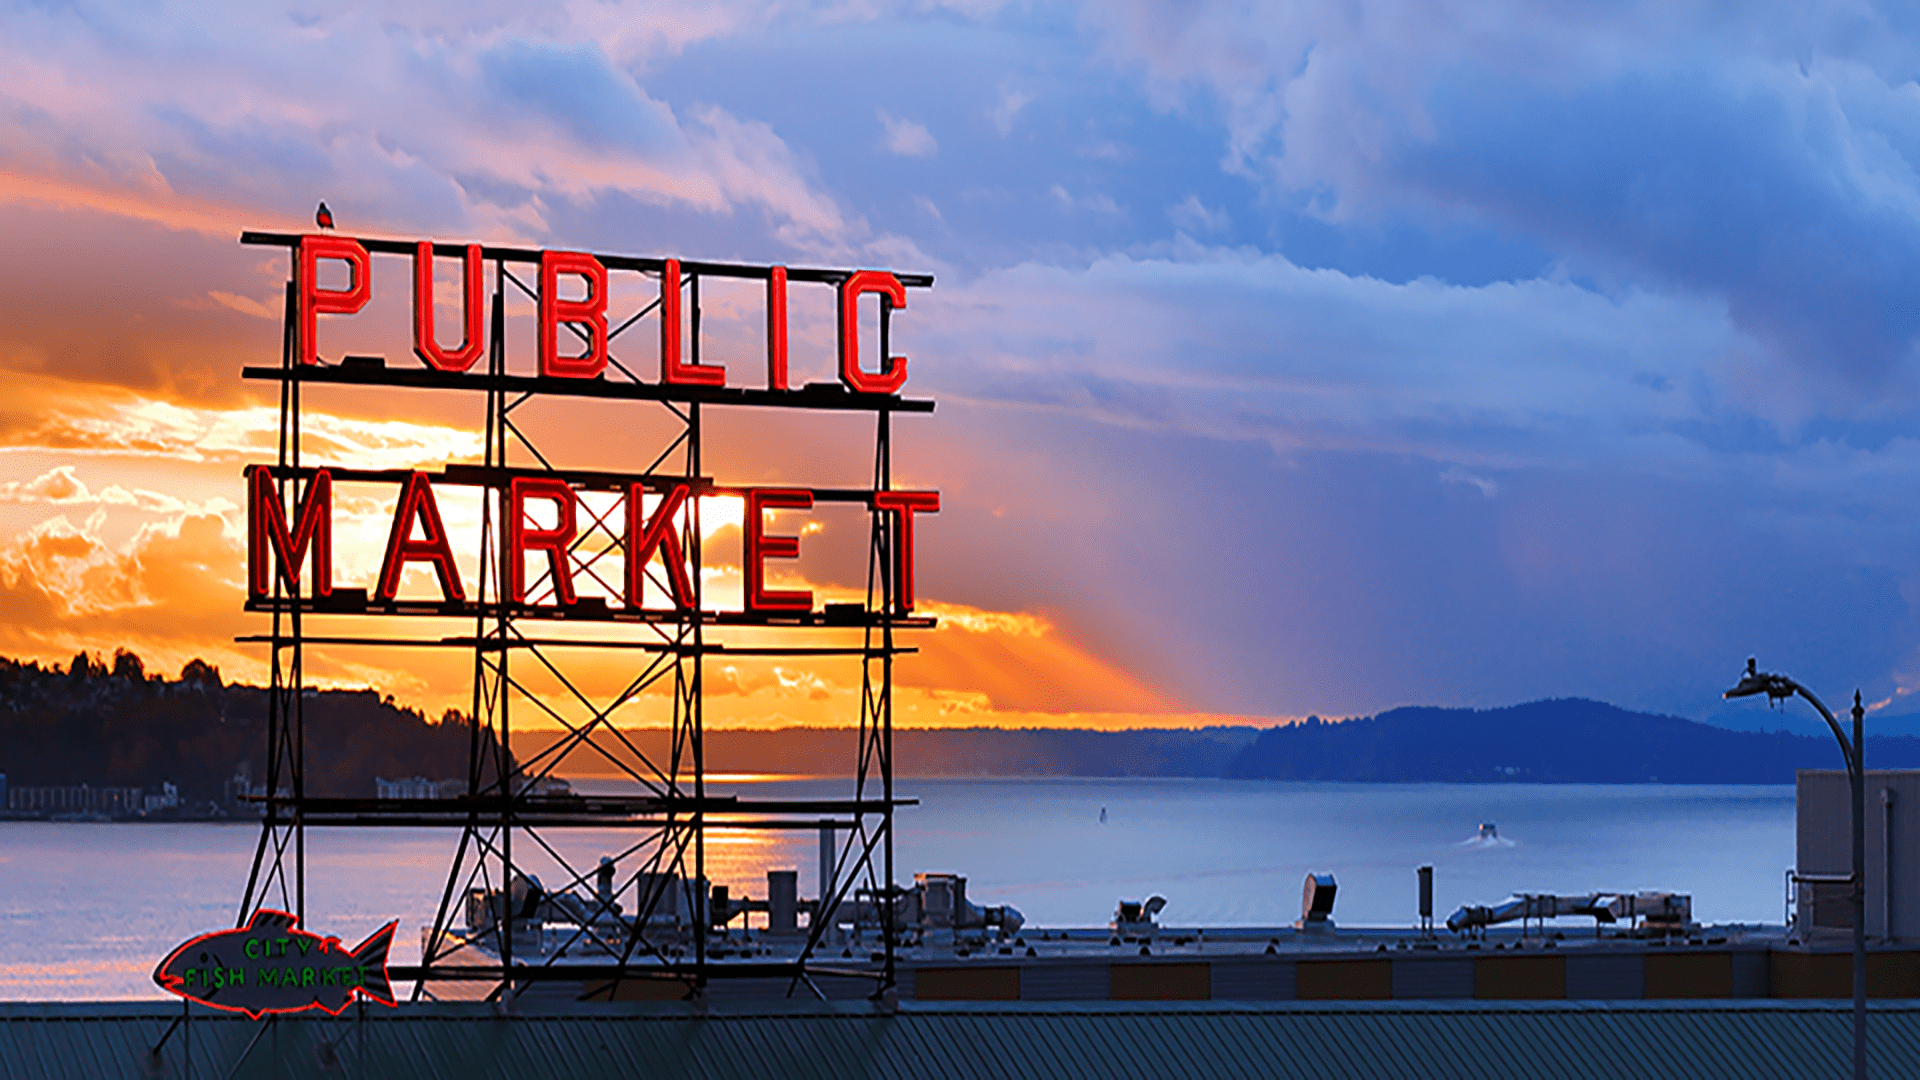 guided tours of seattle